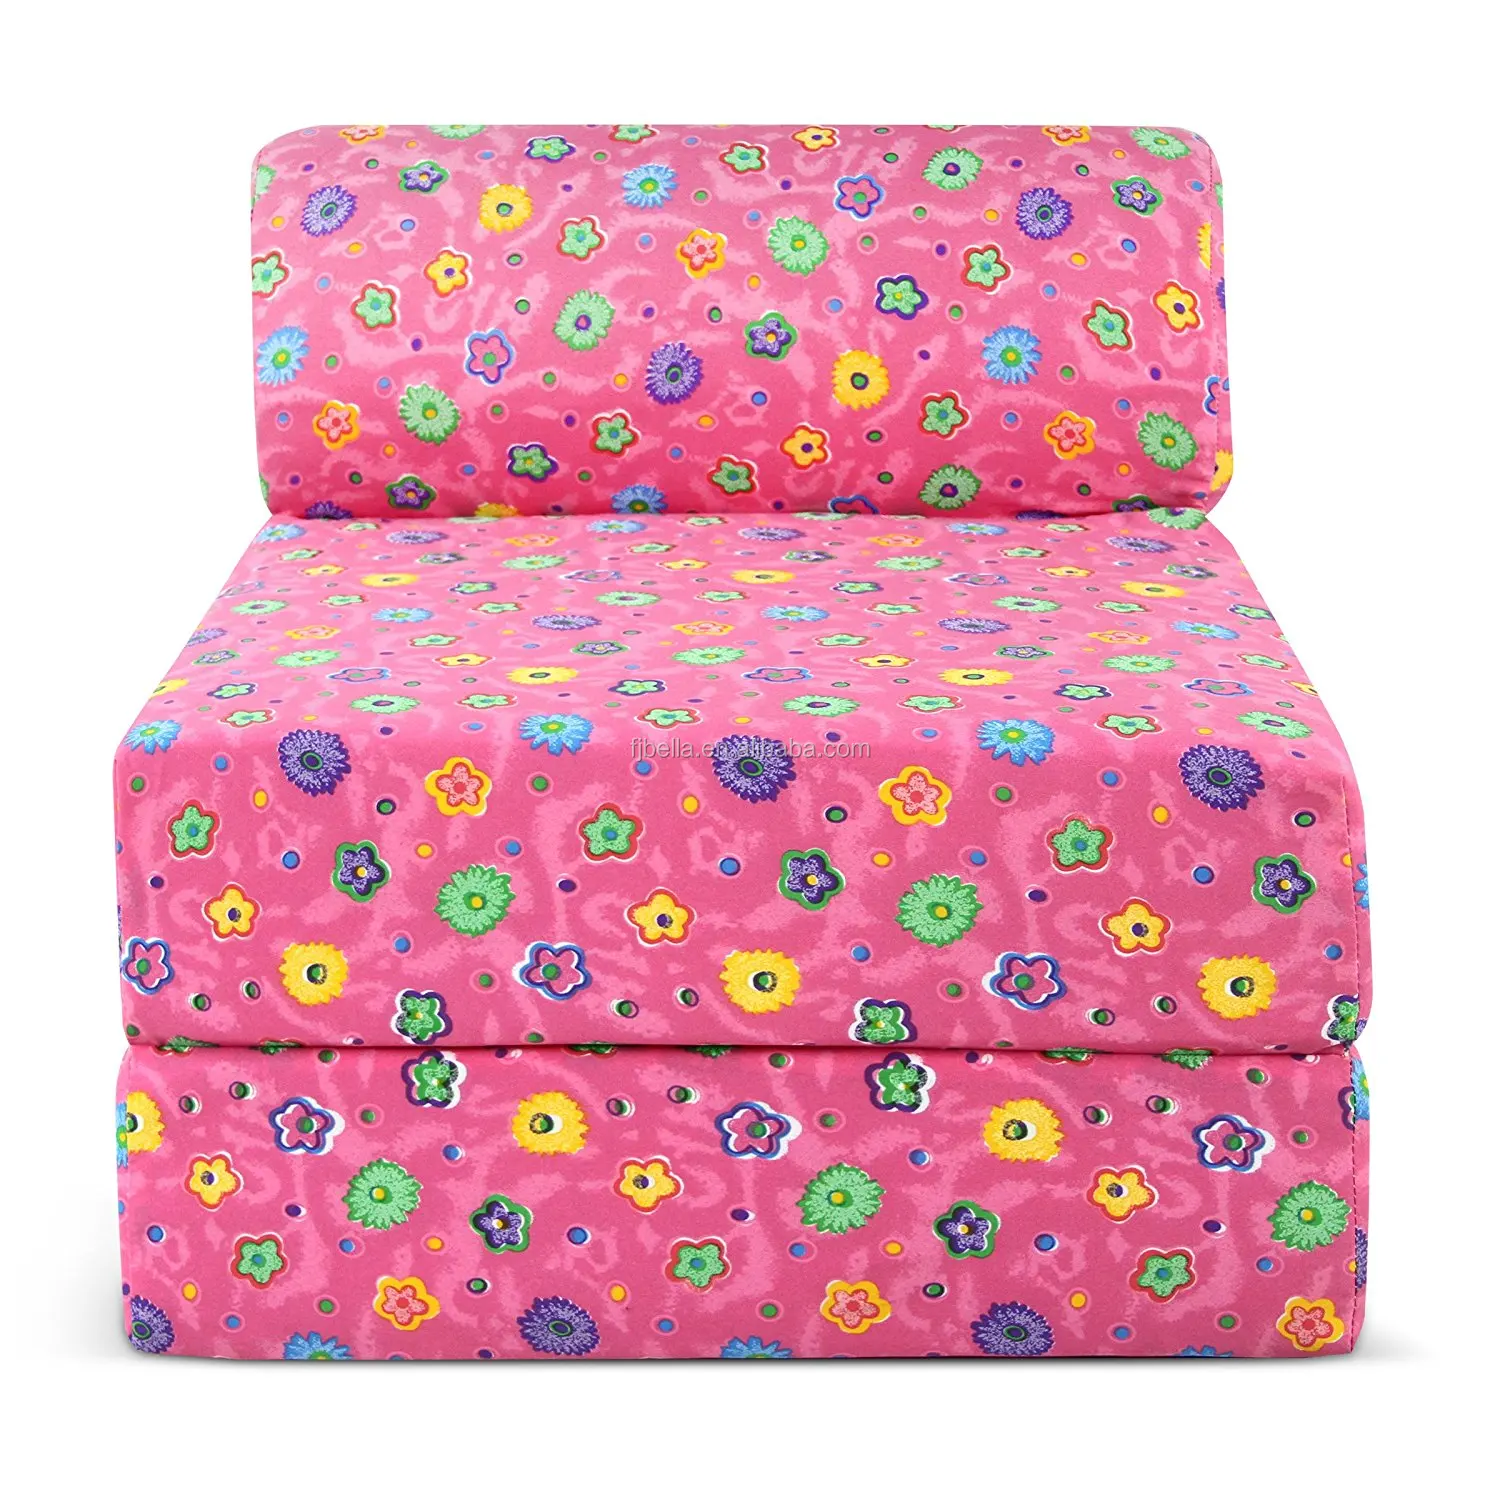 4 Inch Folding Mattress And Sofa With Removable Indoor Outdoor Studio Chair Sleepe Fabric Cover Pink Flower Buy Folding Mattress For Sofa Chairs Seats Folding Mattress For Studio Chair Sleeper Portable